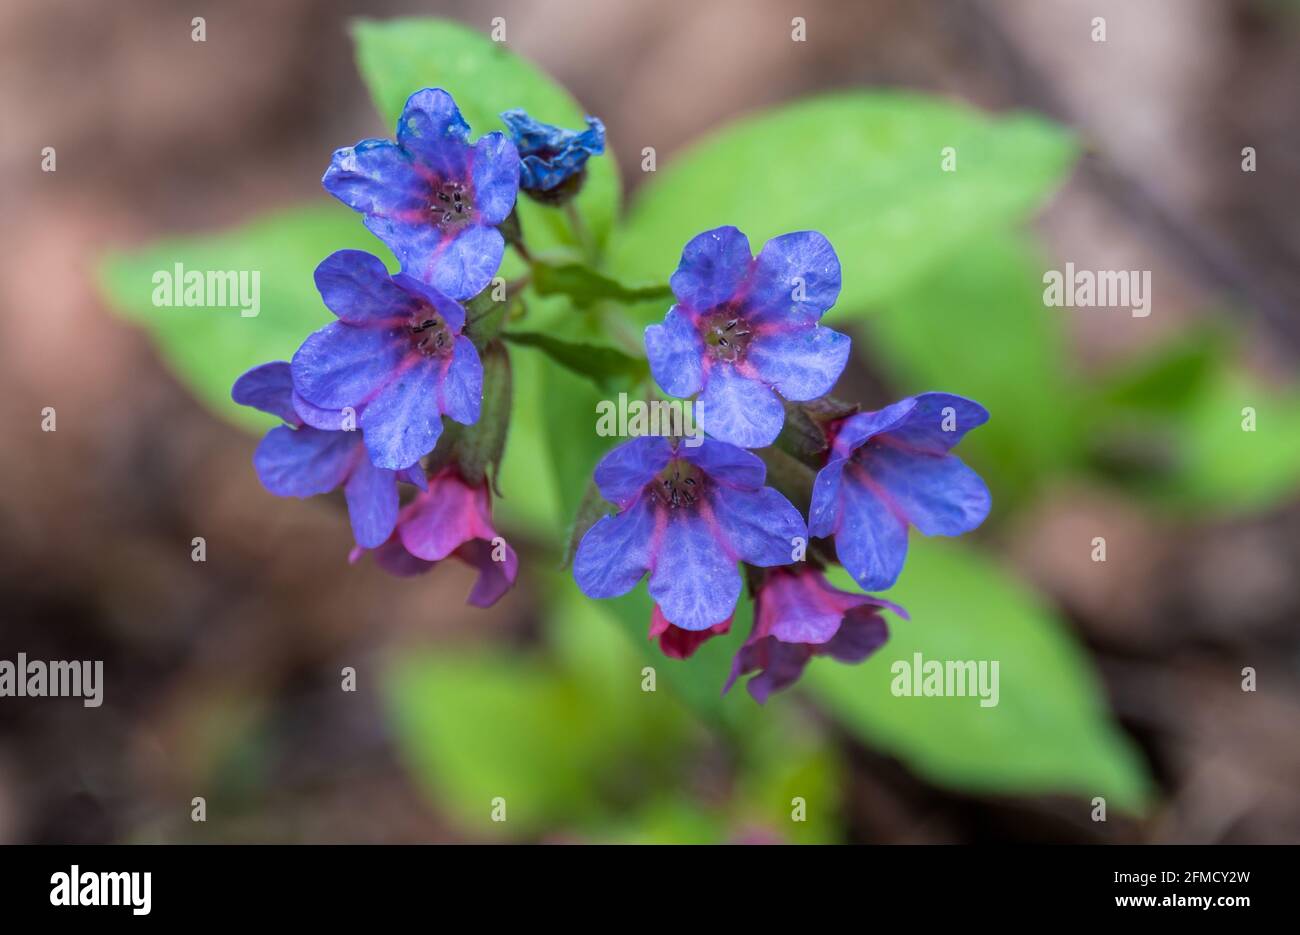 Spring blue flowers of Suffolk lungwort or Pulmonaria obscura. Medicinal early flowering plant lungwort in the spring forest. Shallow depth of field. Stock Photo